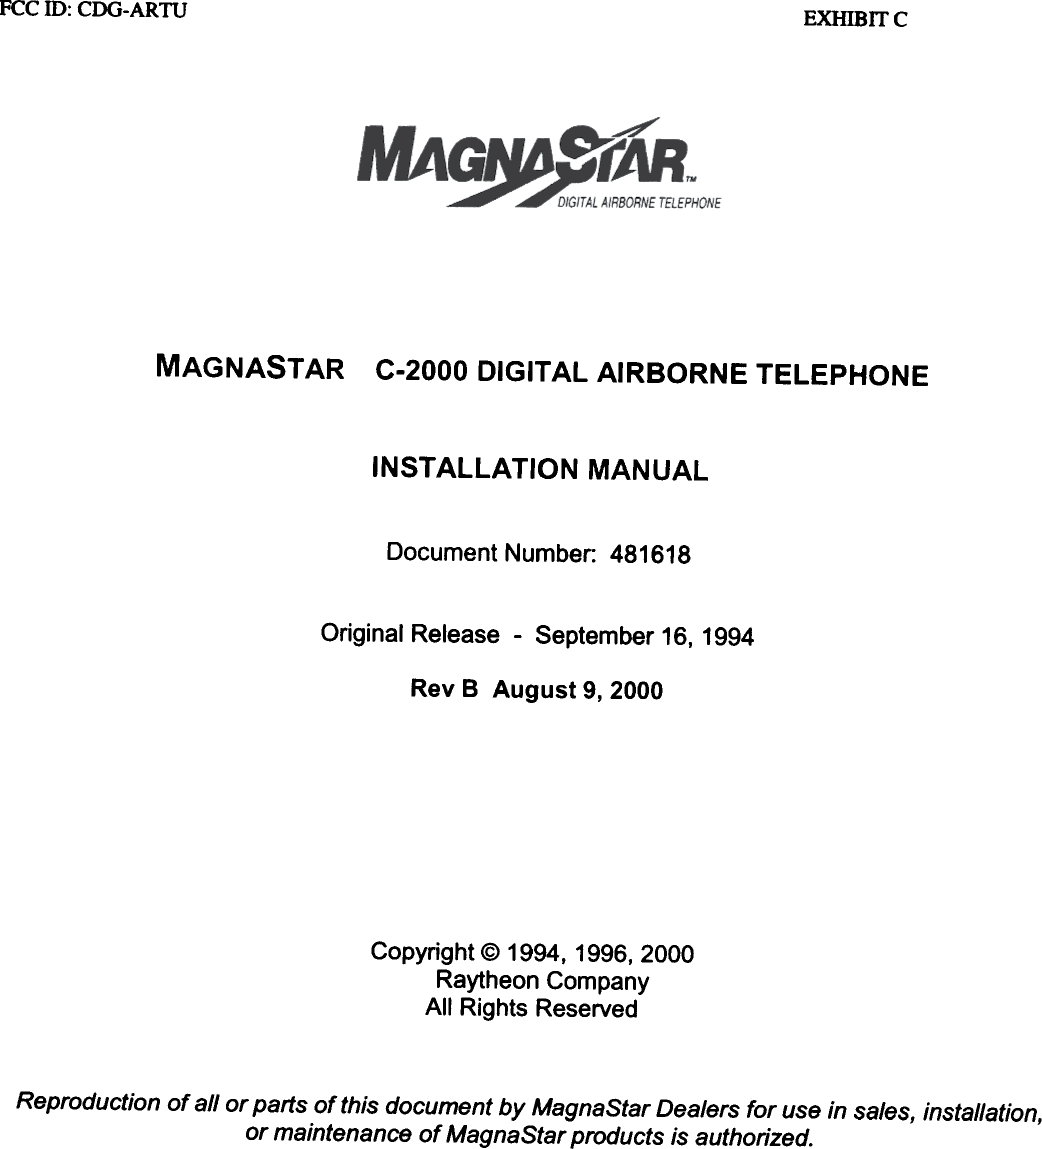 FCC ill:  CDG-ARTU EXHlBrrcMAGNASTAR C-2000 DIGITAL AIRBORNE TELEPHONEINSTAllATION  MANUALDocument Number: 481618Original Release -  September 16, 1994Rev B  August  9, 2000Copyright  @ 1994,  1996, 2000Raytheon  CompanyAll  Rights  ReservedReproduction of all or parts of this document by MagnaStar Dealers for use in sales, installation,or maintenance of MagnaStar products is authorized.